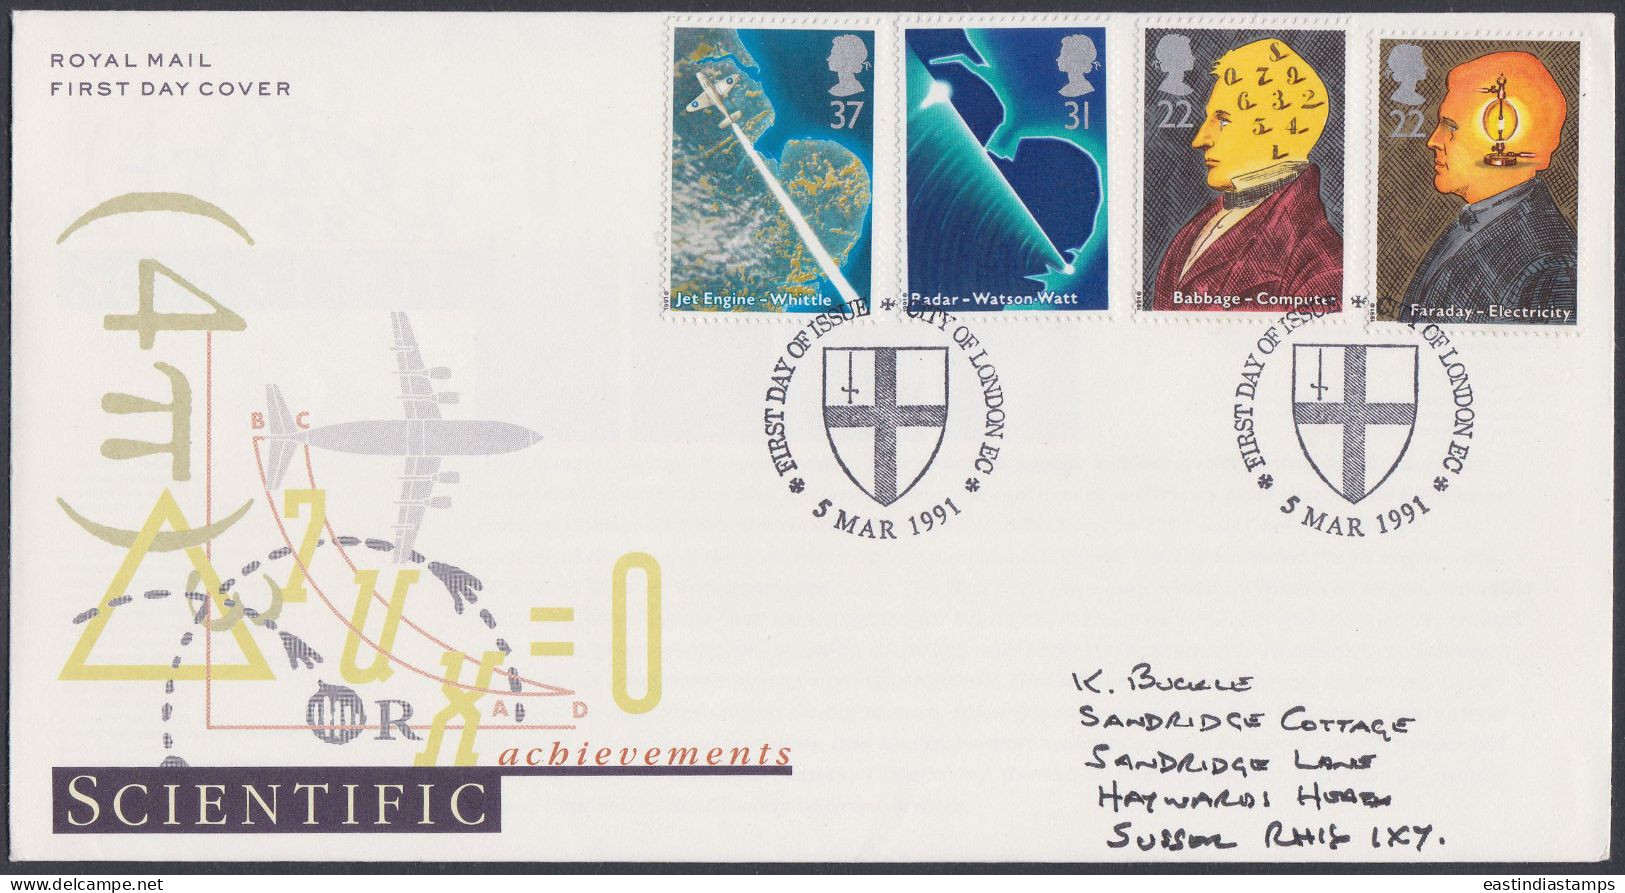 GB Great Britain 1991 FDC Science, Faraday Electricity, Computer, Radar, Jet, Pictorial Postmark, First Day Cover - Storia Postale